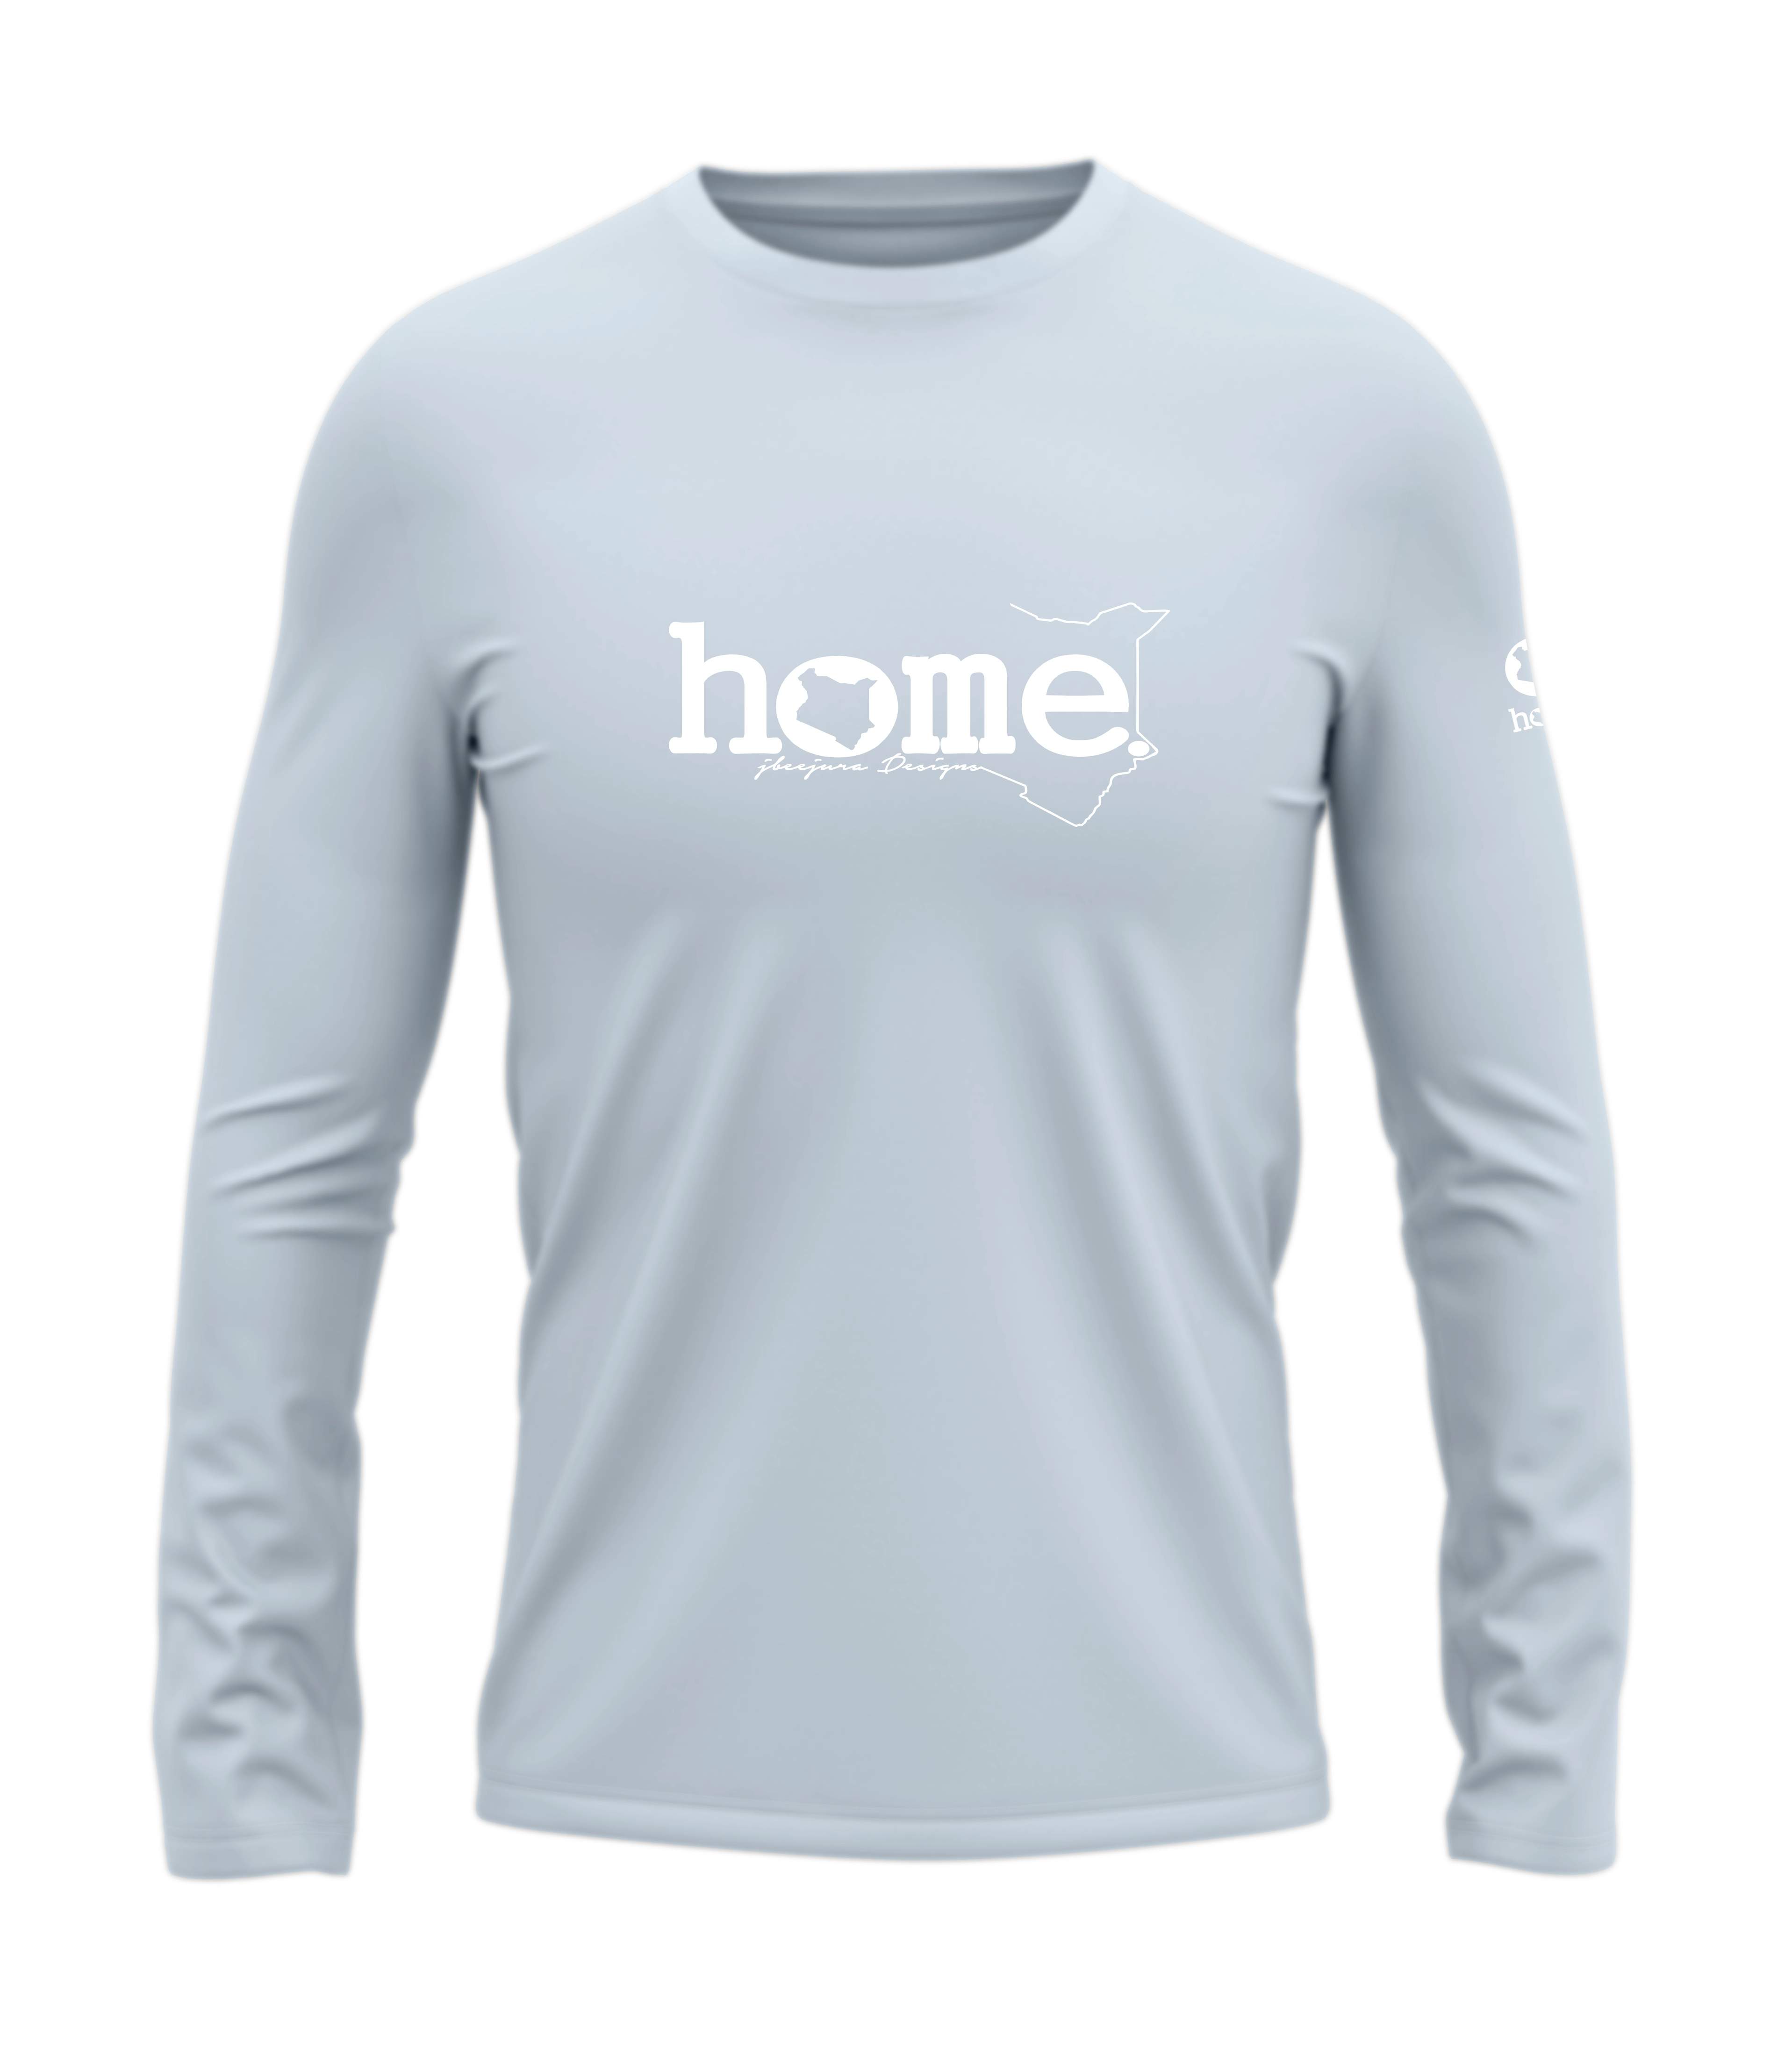 home_254 LONG-SLEEVED SKY-BLUE T-SHIRT WITH A WHITE CLASSIC WORDS PRINT – COTTON PLUS FABRIC